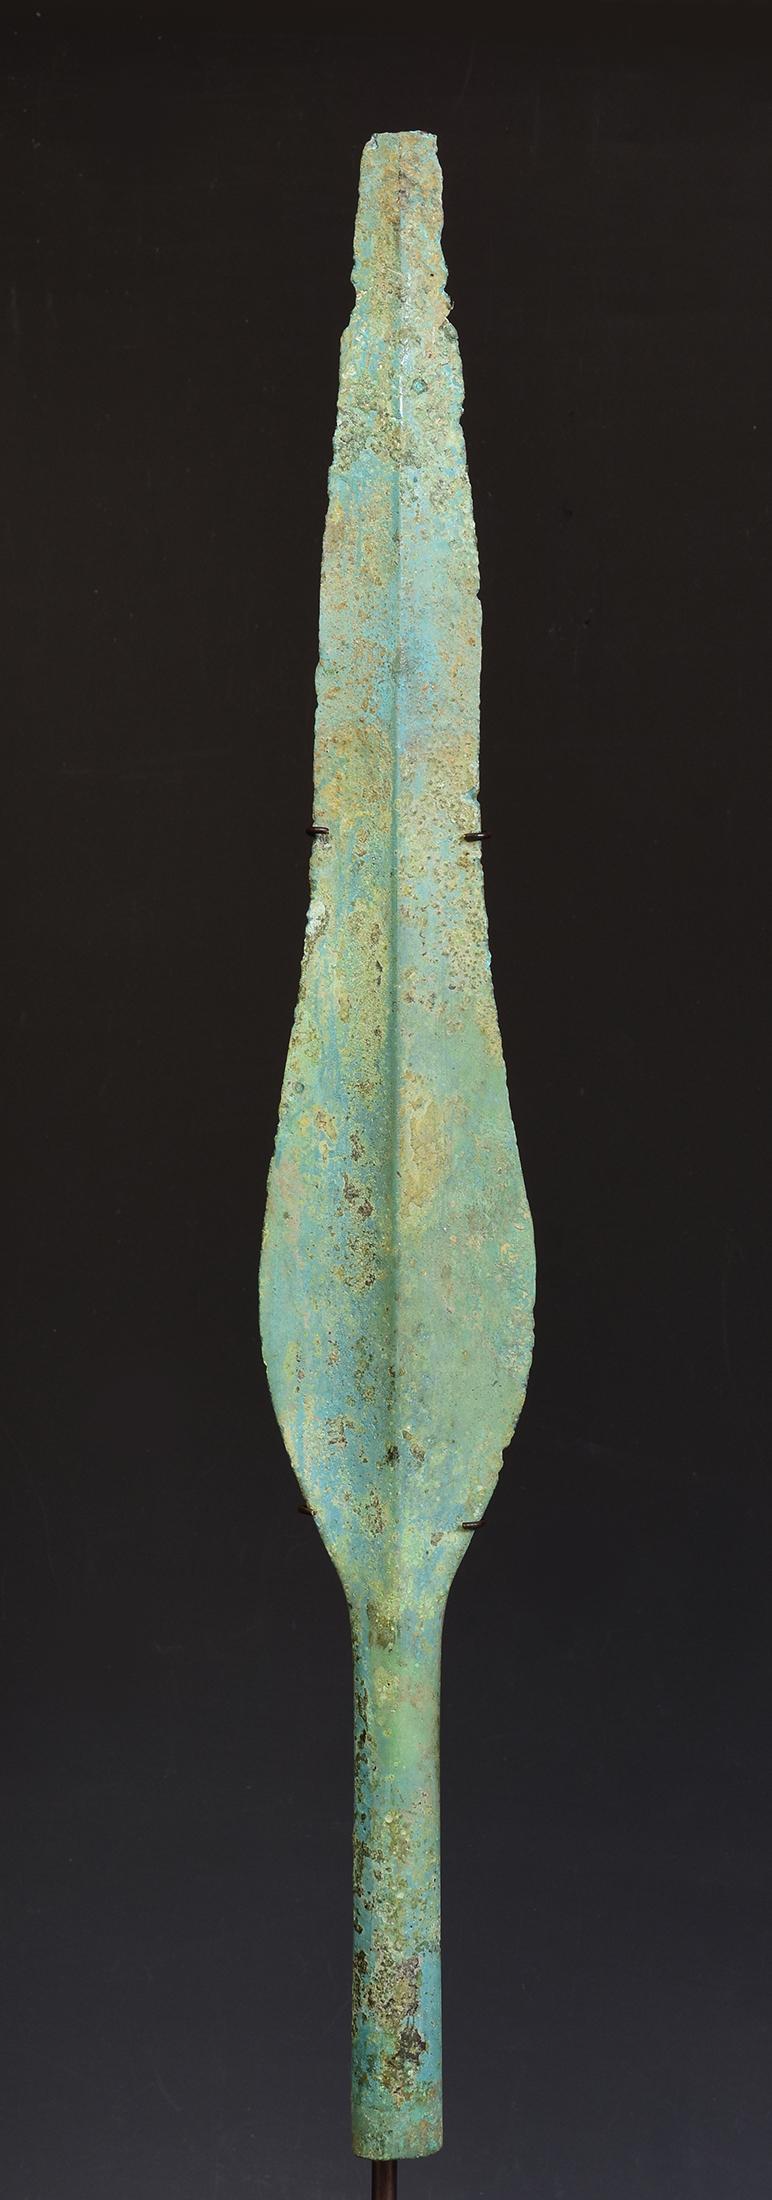 Persian Ancient Antique Luristan Bronze Spear Early Iron Age Weapon For Sale